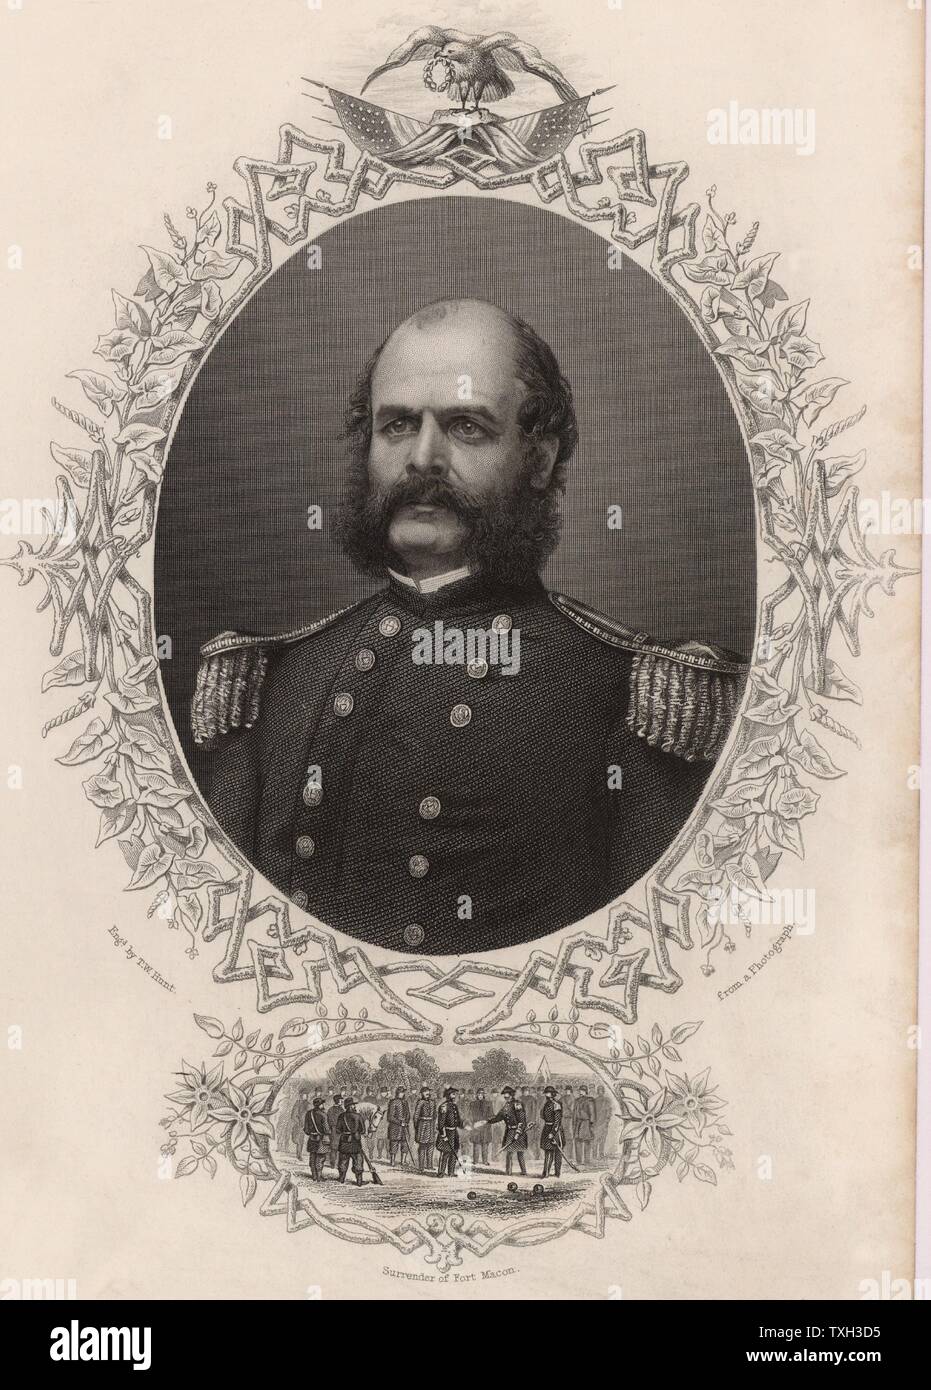 Ambrose Everett Burnside (1824-81) American soldier; Unionist general in American Civil War.  His style of facial hair was called Burnsides and is now known as sideburns. Engraving Stock Photo